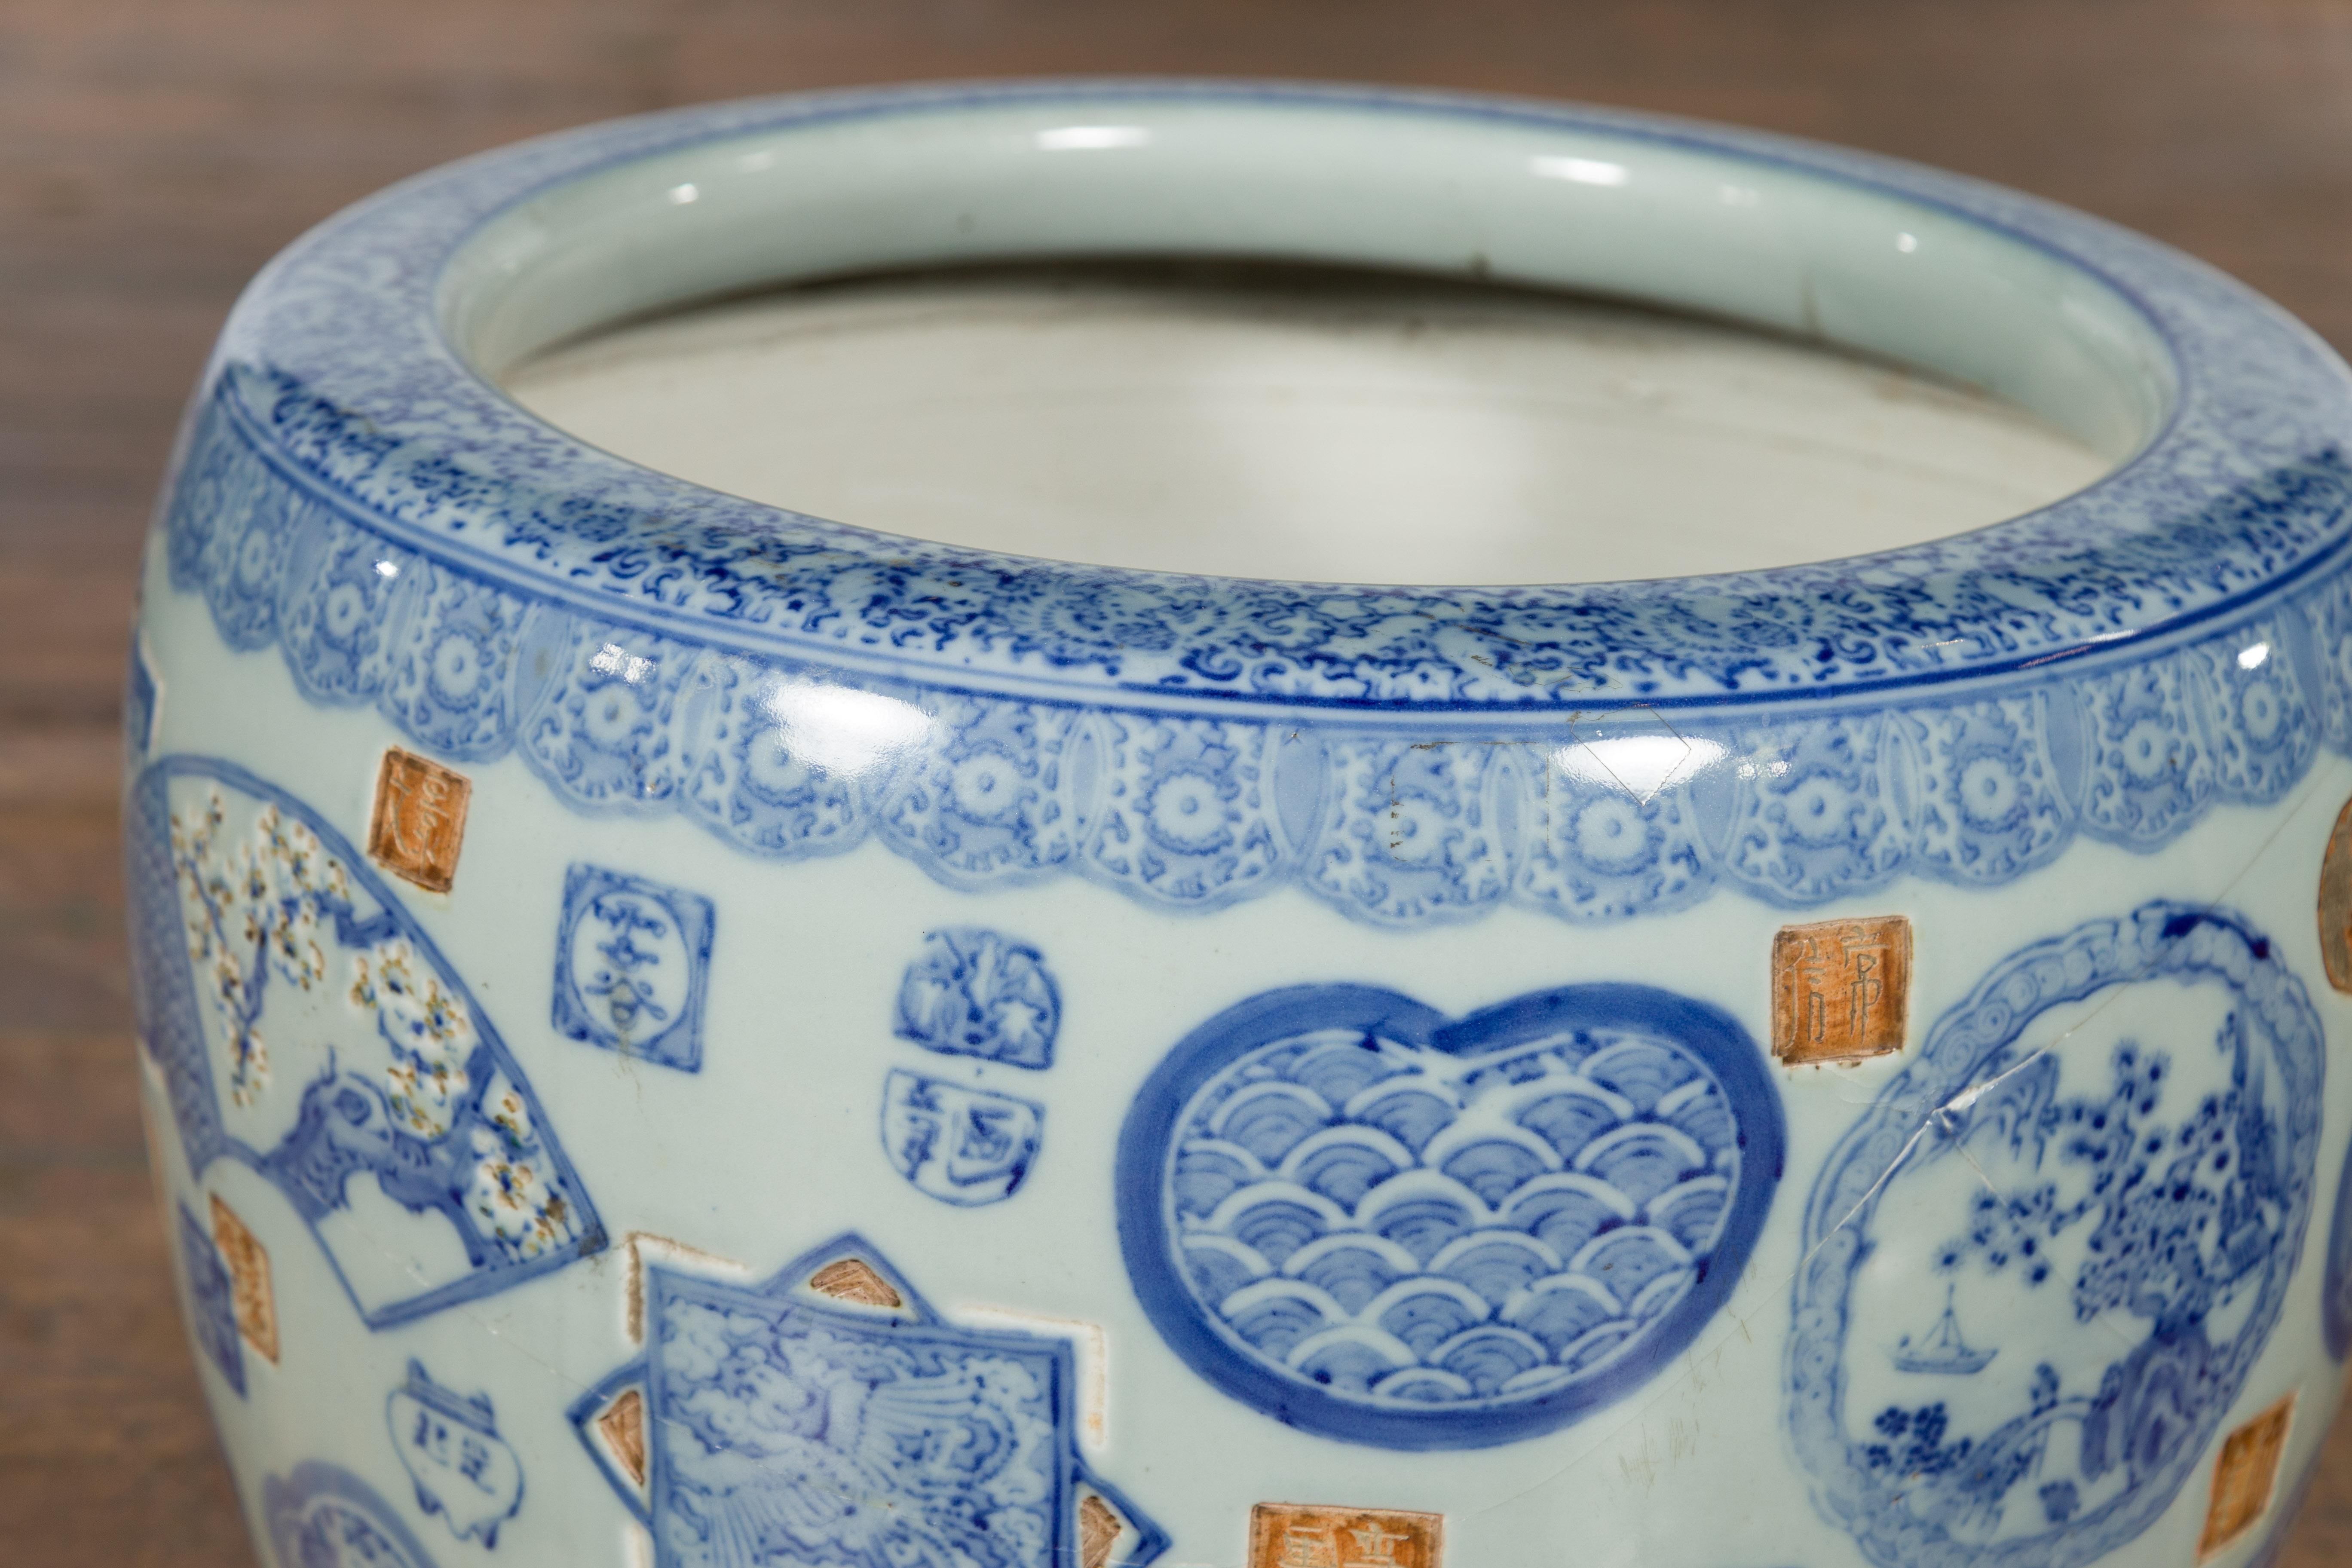 19th Century Chinese Qing Dynasty Blue and White Porcelain Planter with Blooming Trees